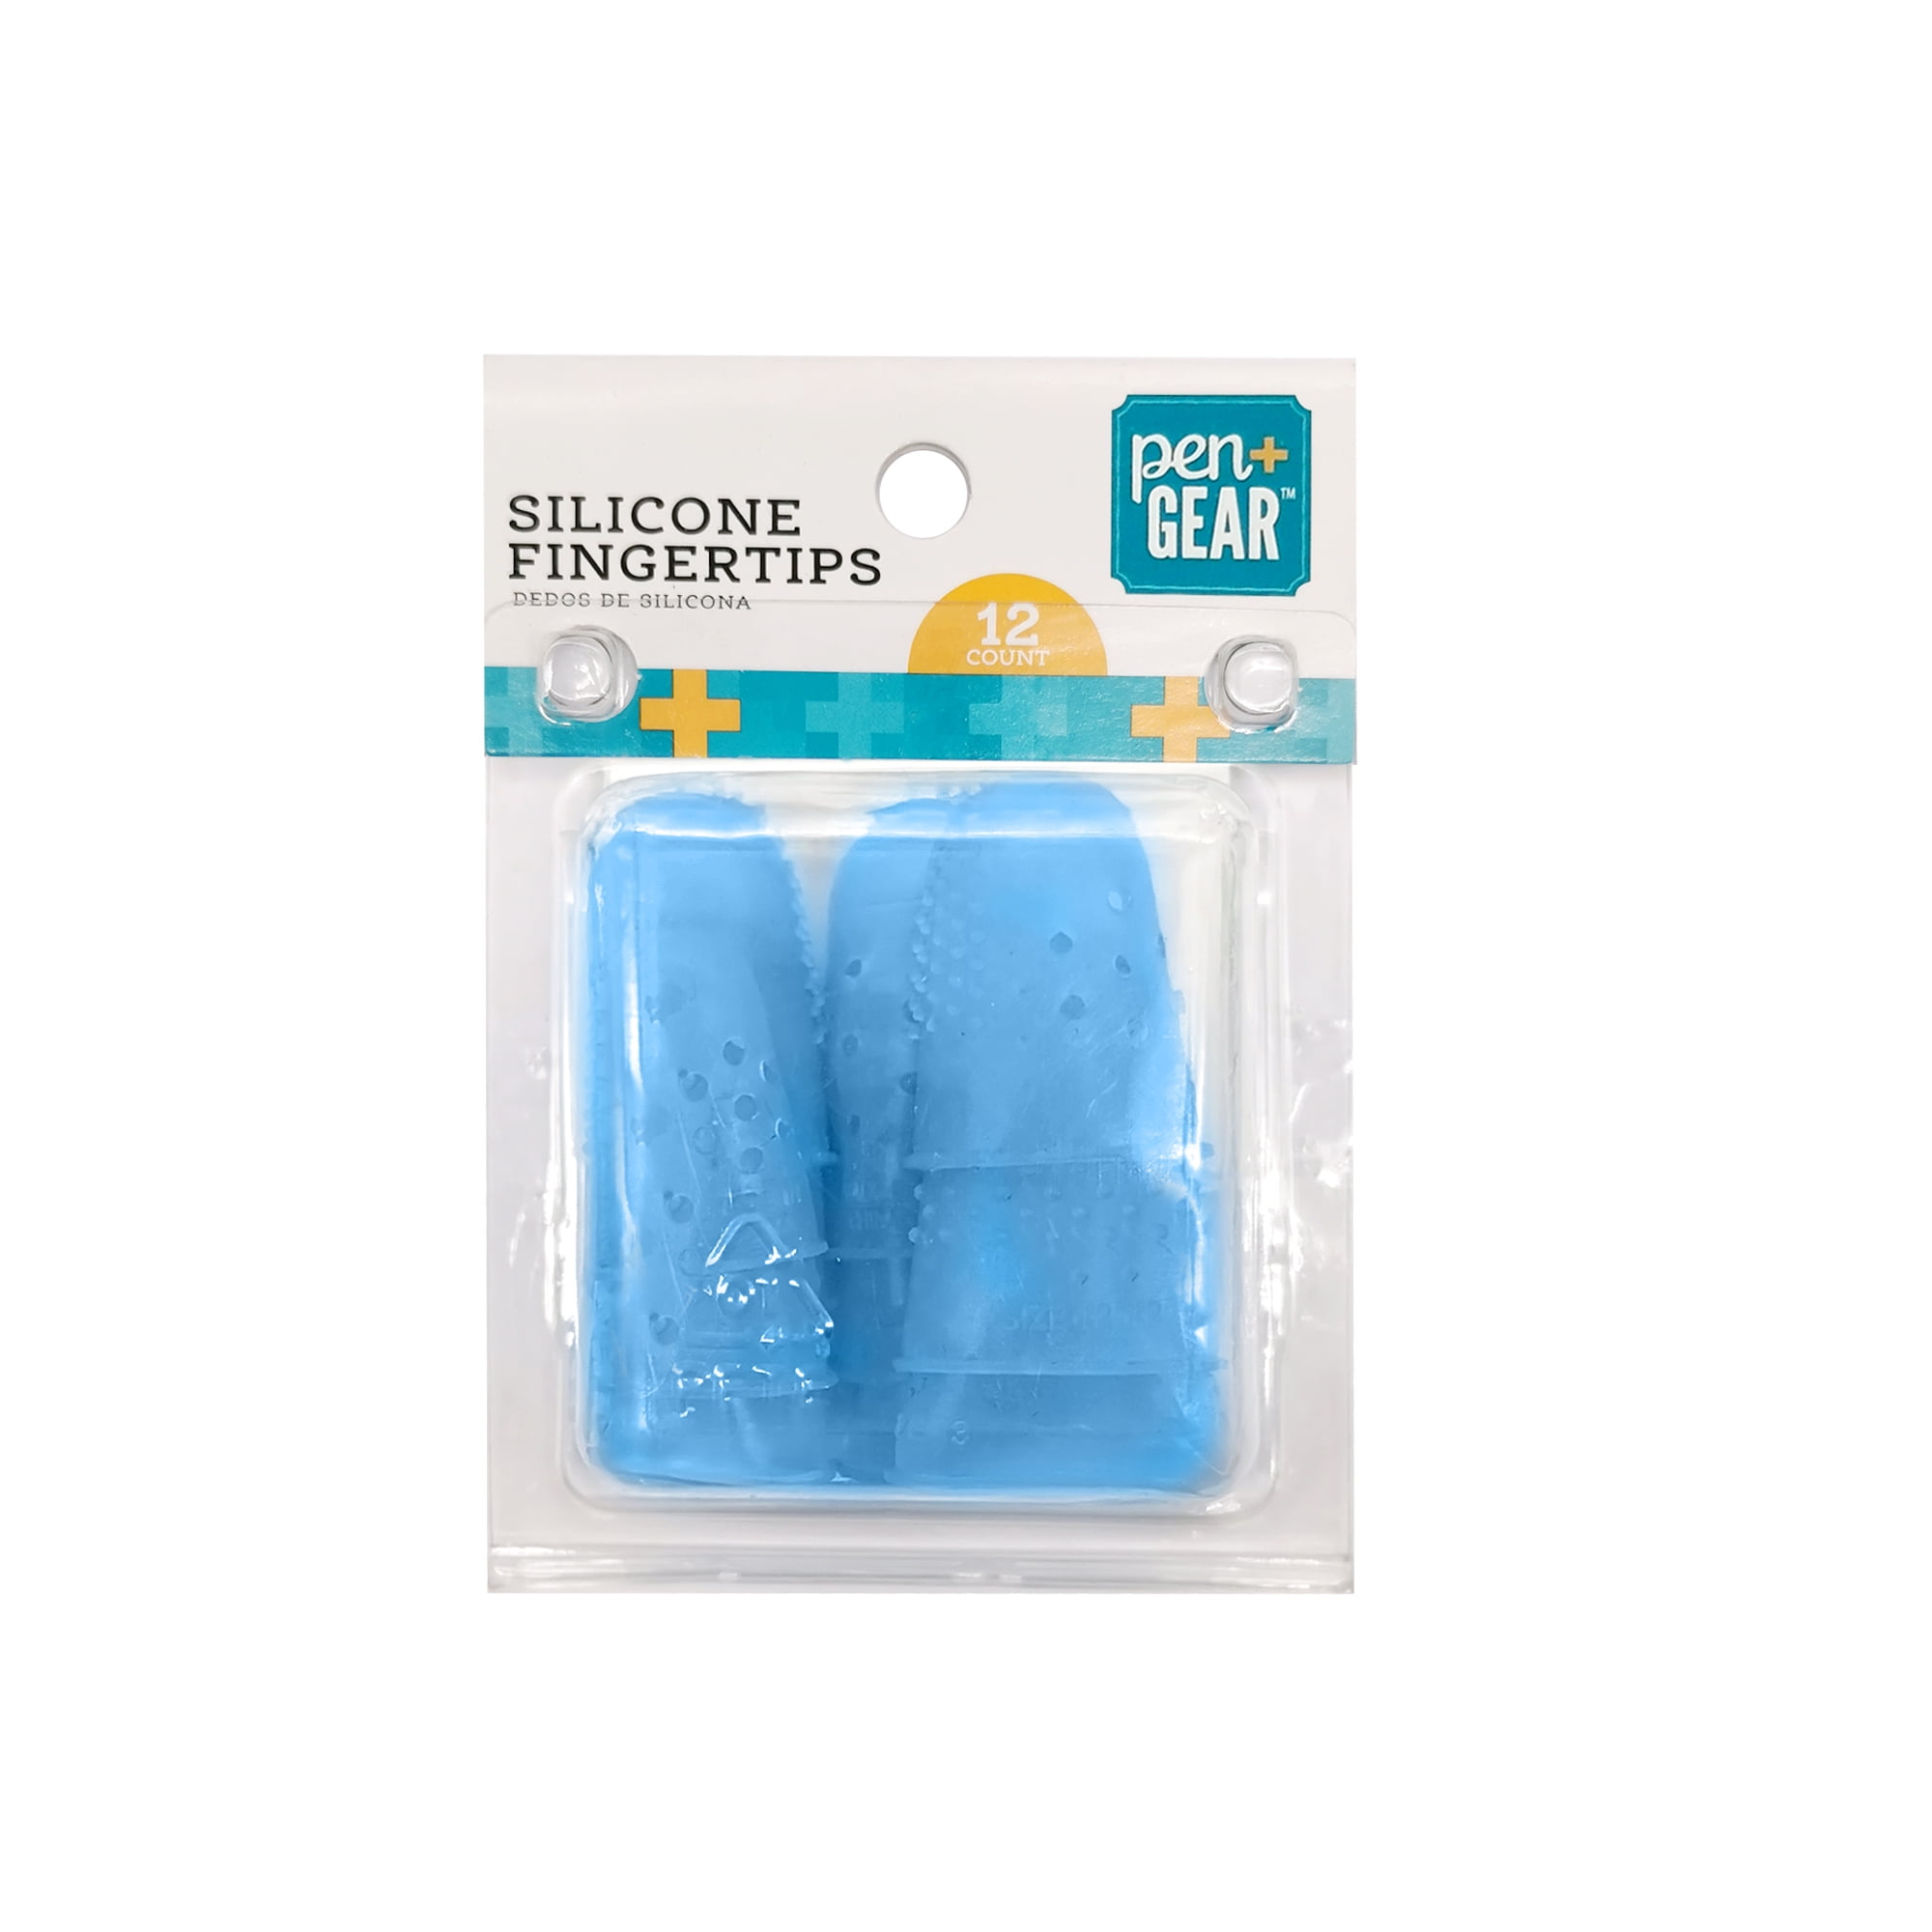 Pen + Gear Silicone Finger Protector Thumbs Cover Fingertip Gloves,Translucent Blue, 12 Count